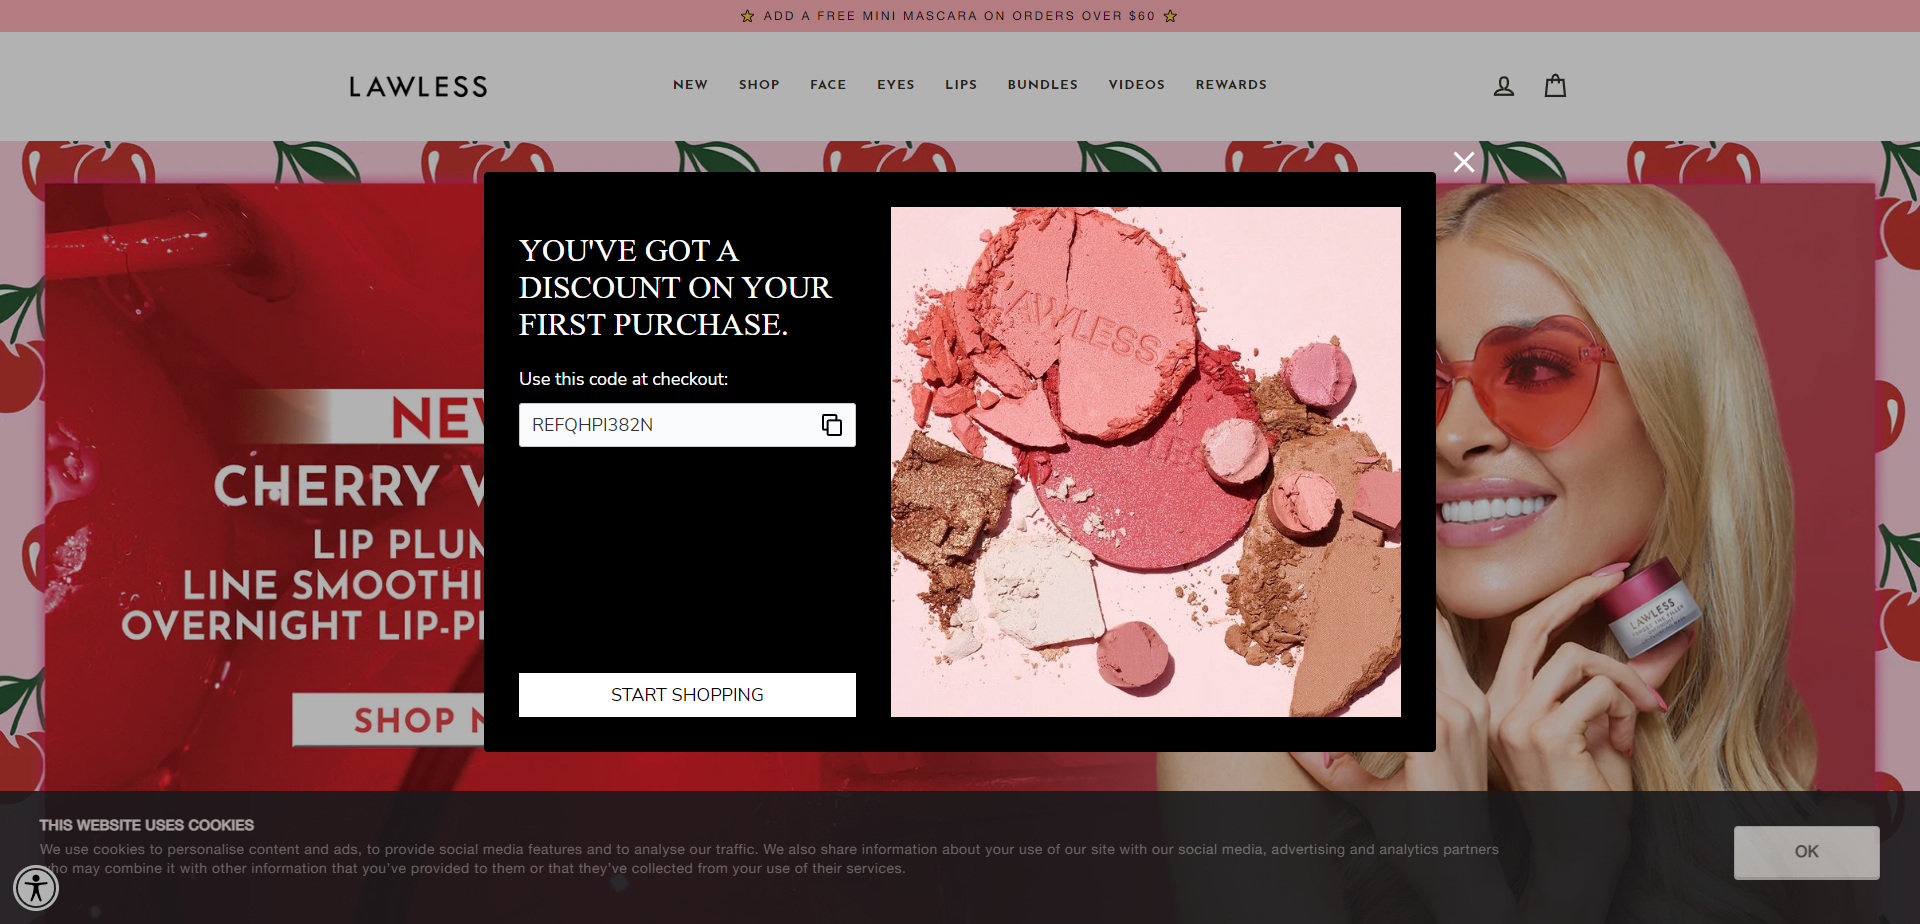 Referral Landing Page for Lawless Beauty